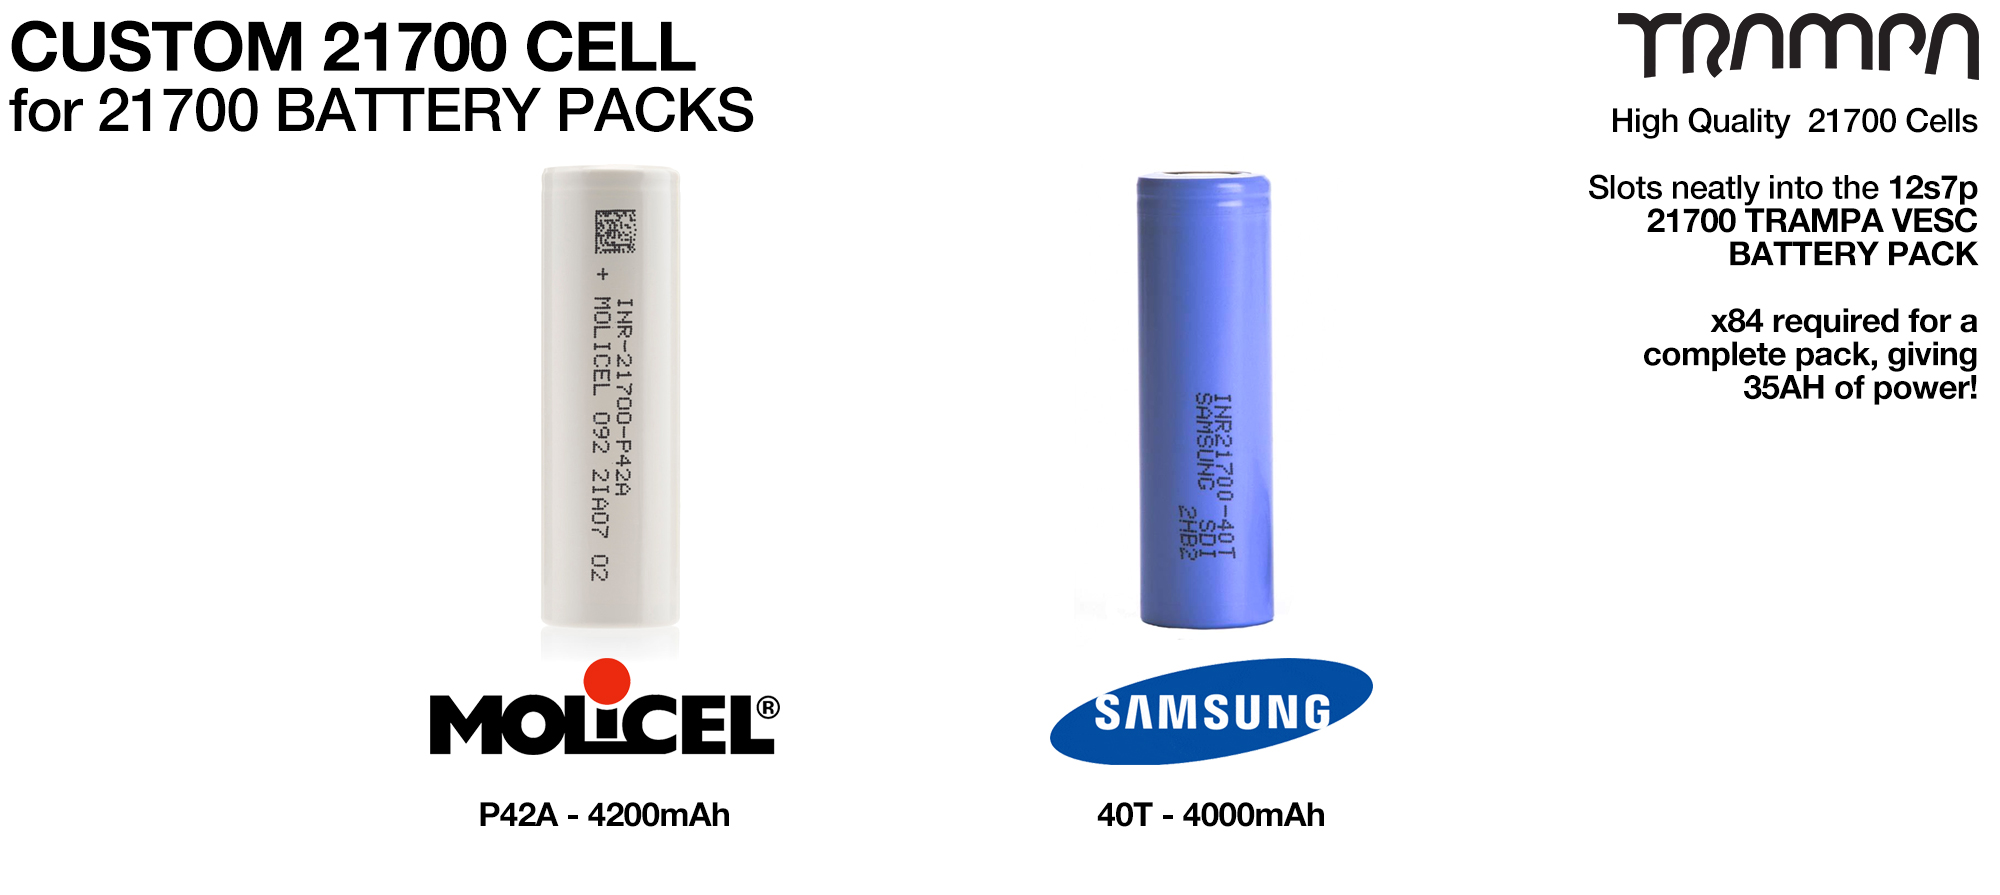 21700 Cells Lion NCA Batteries - SOLD TO UK CUSTOMERS ONLY